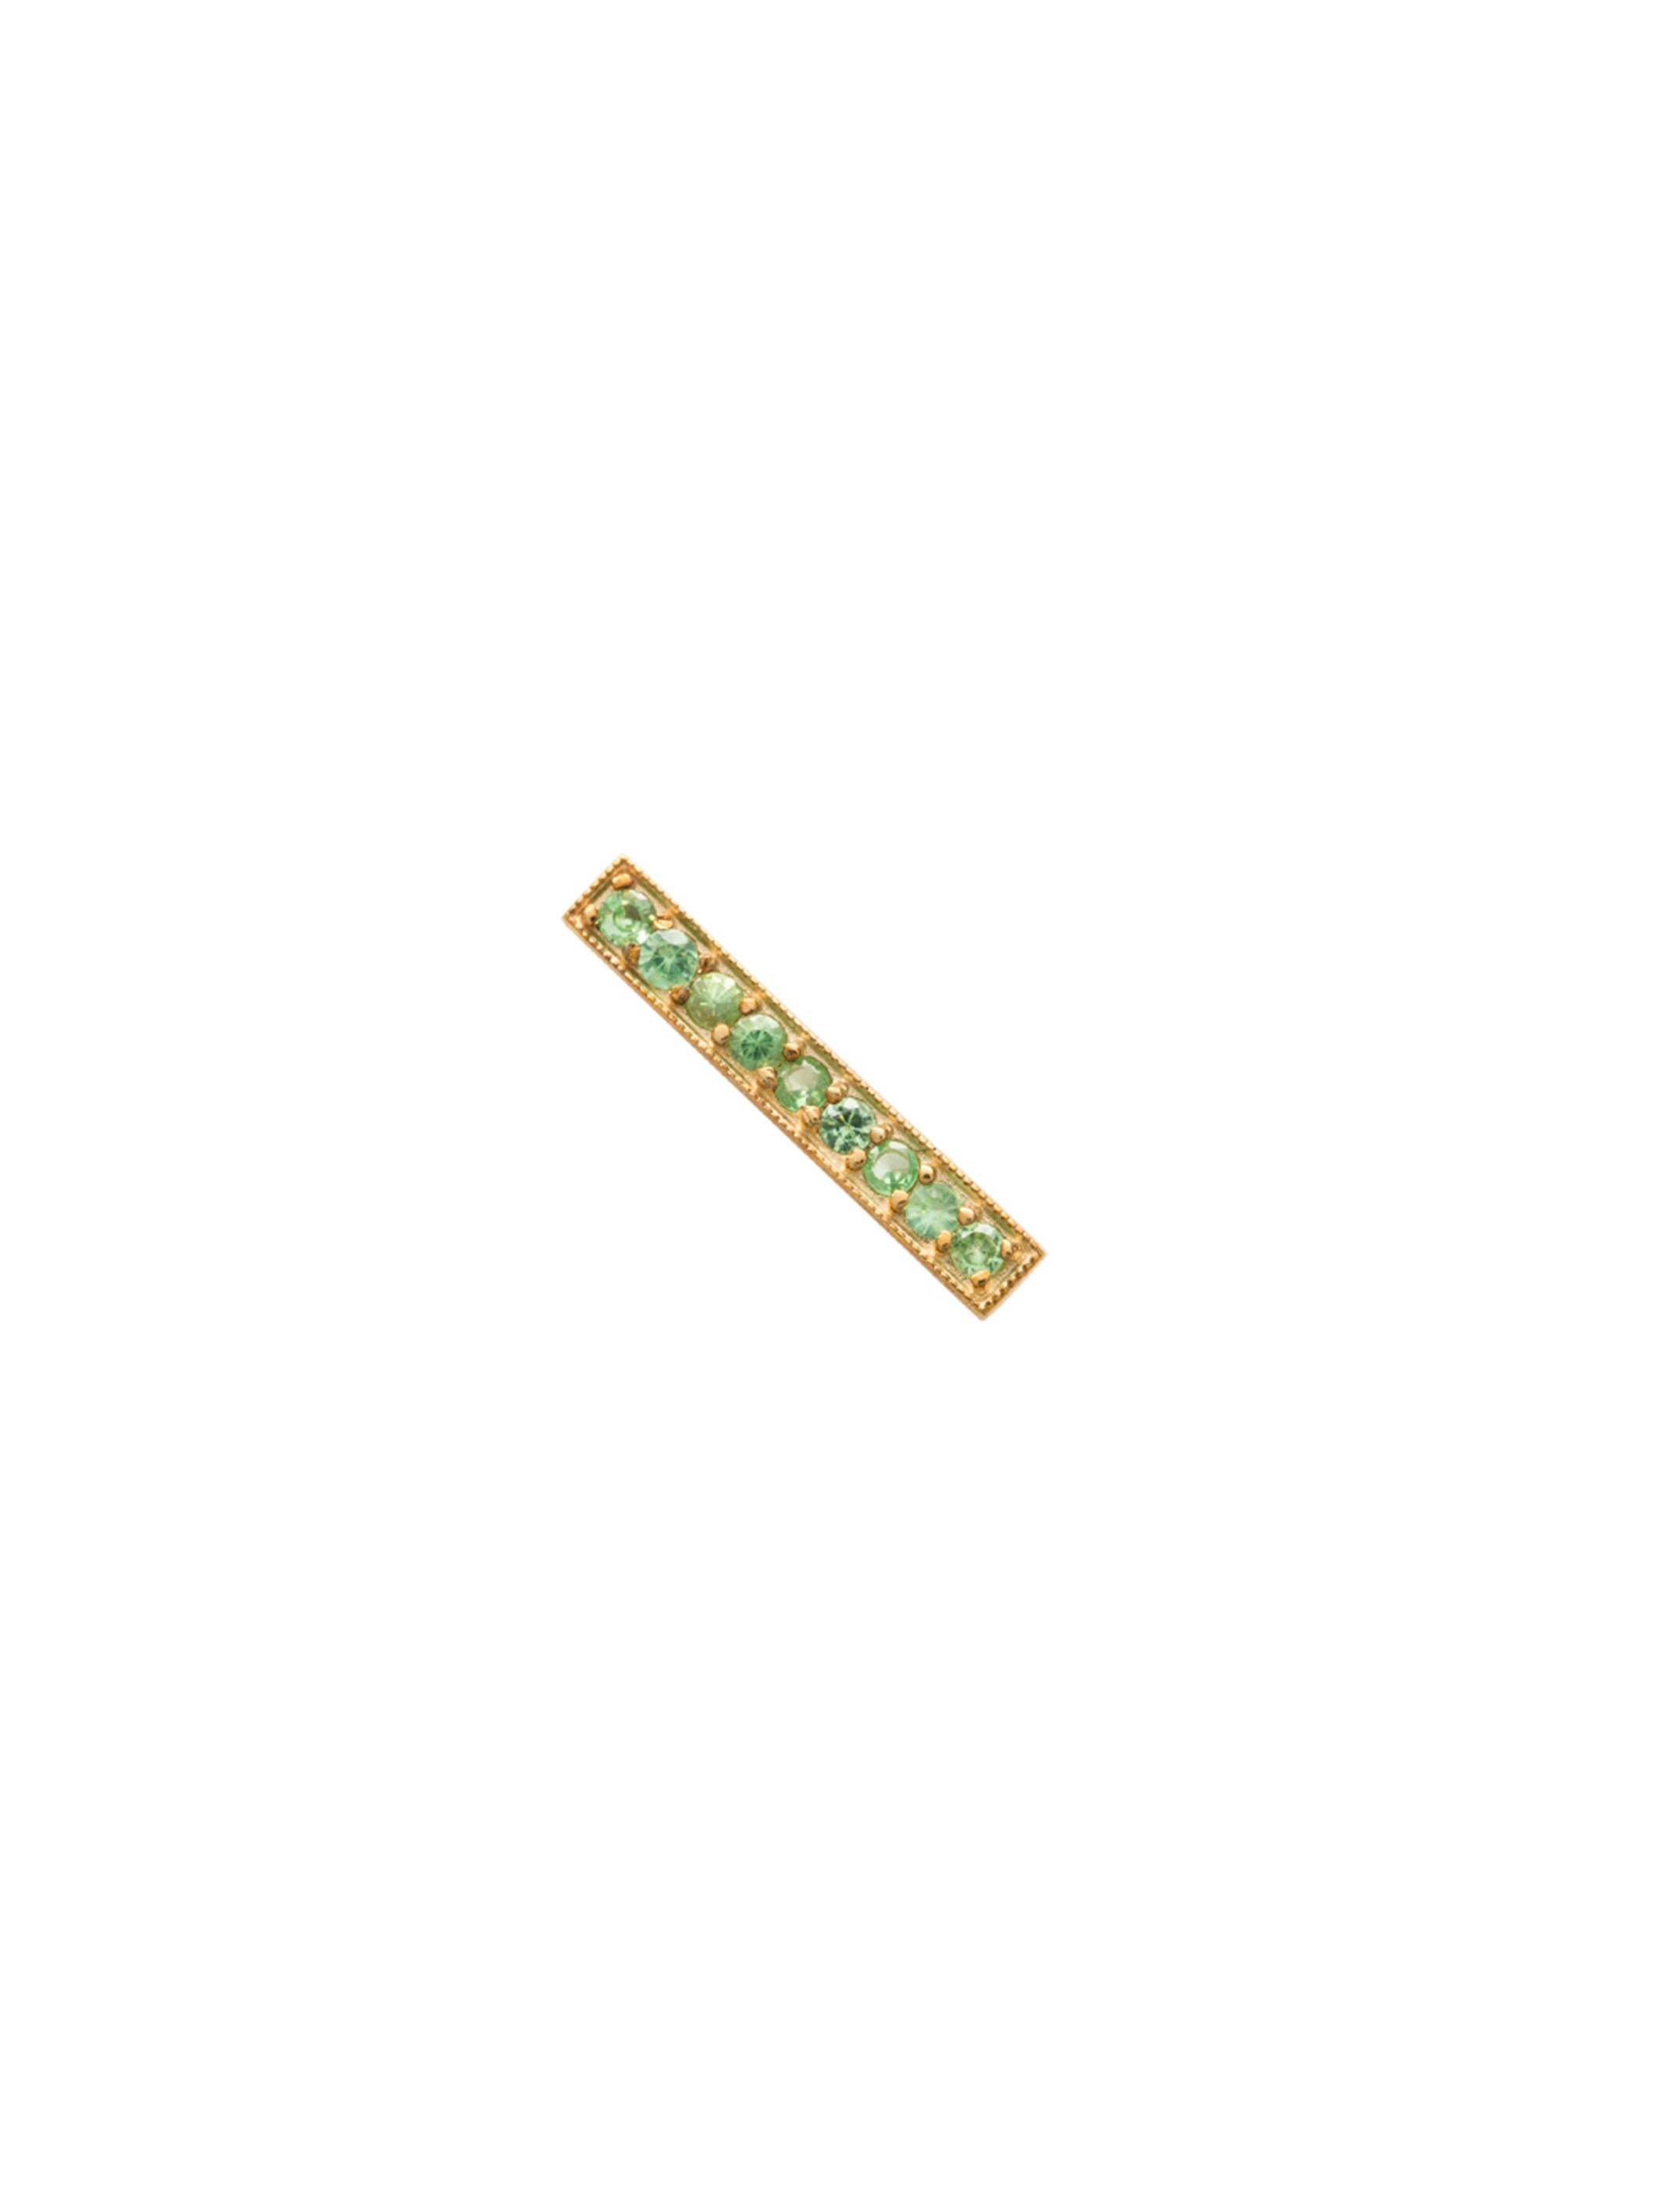 Round Cut Fringed Earring with Green Sapphire Pavé Bar in 9Karat gold from IOSSELLIANI For Sale